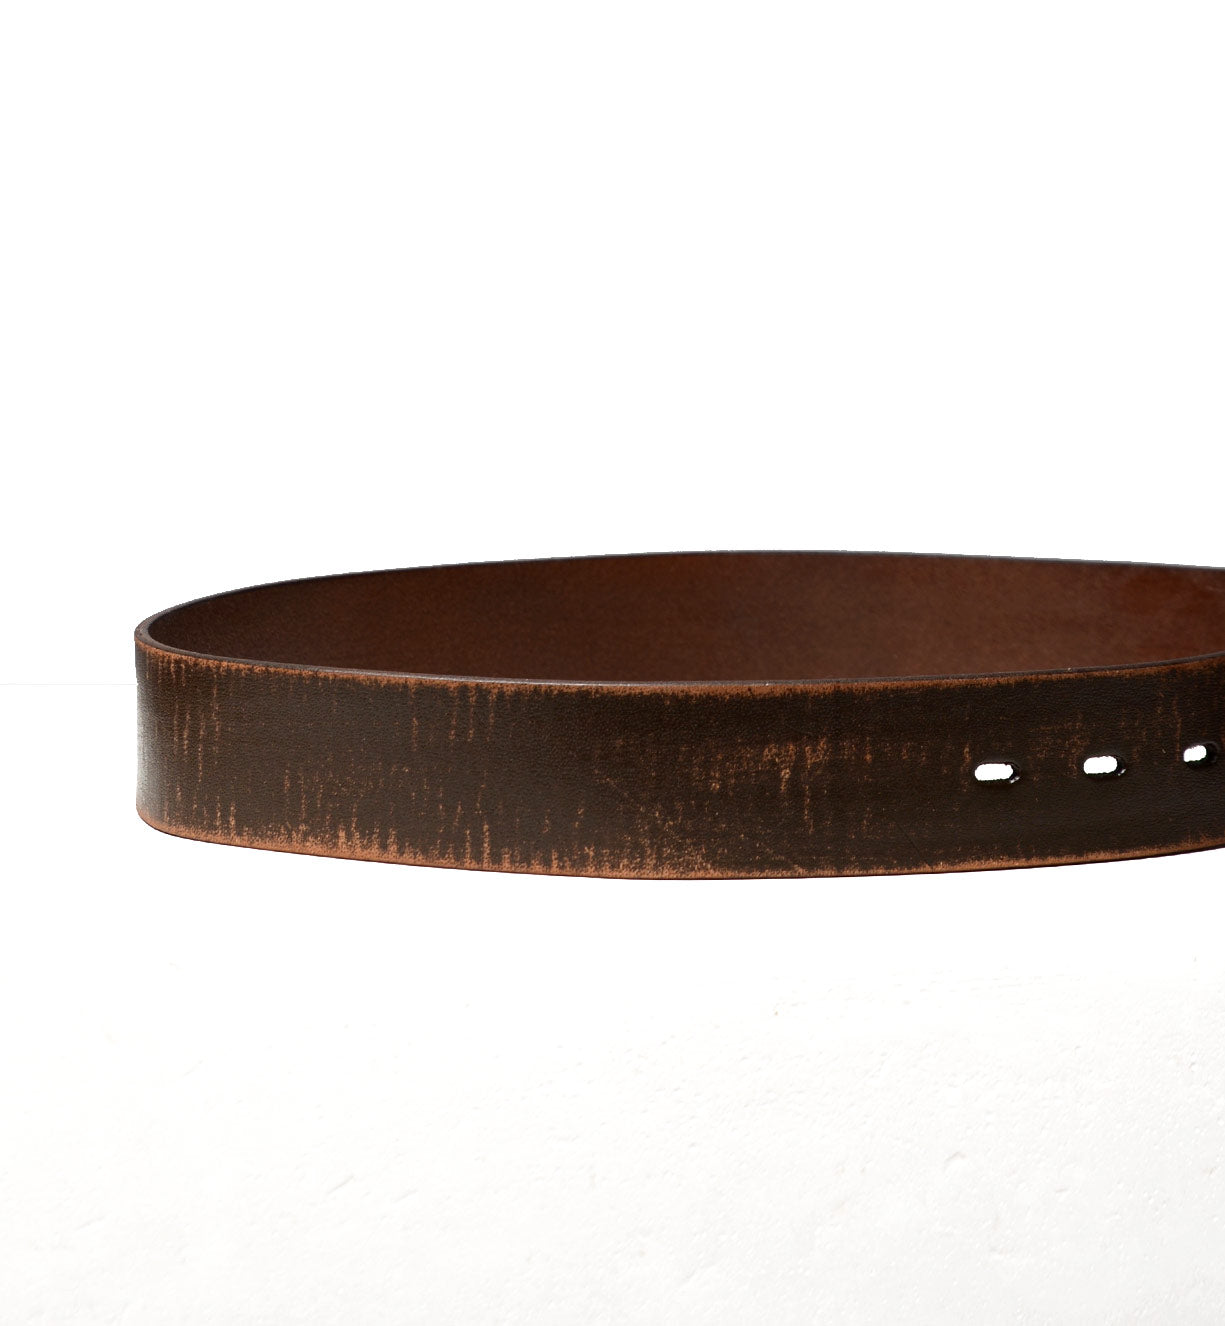 A Hobo brown leather belt on a white background by Bed Stu.